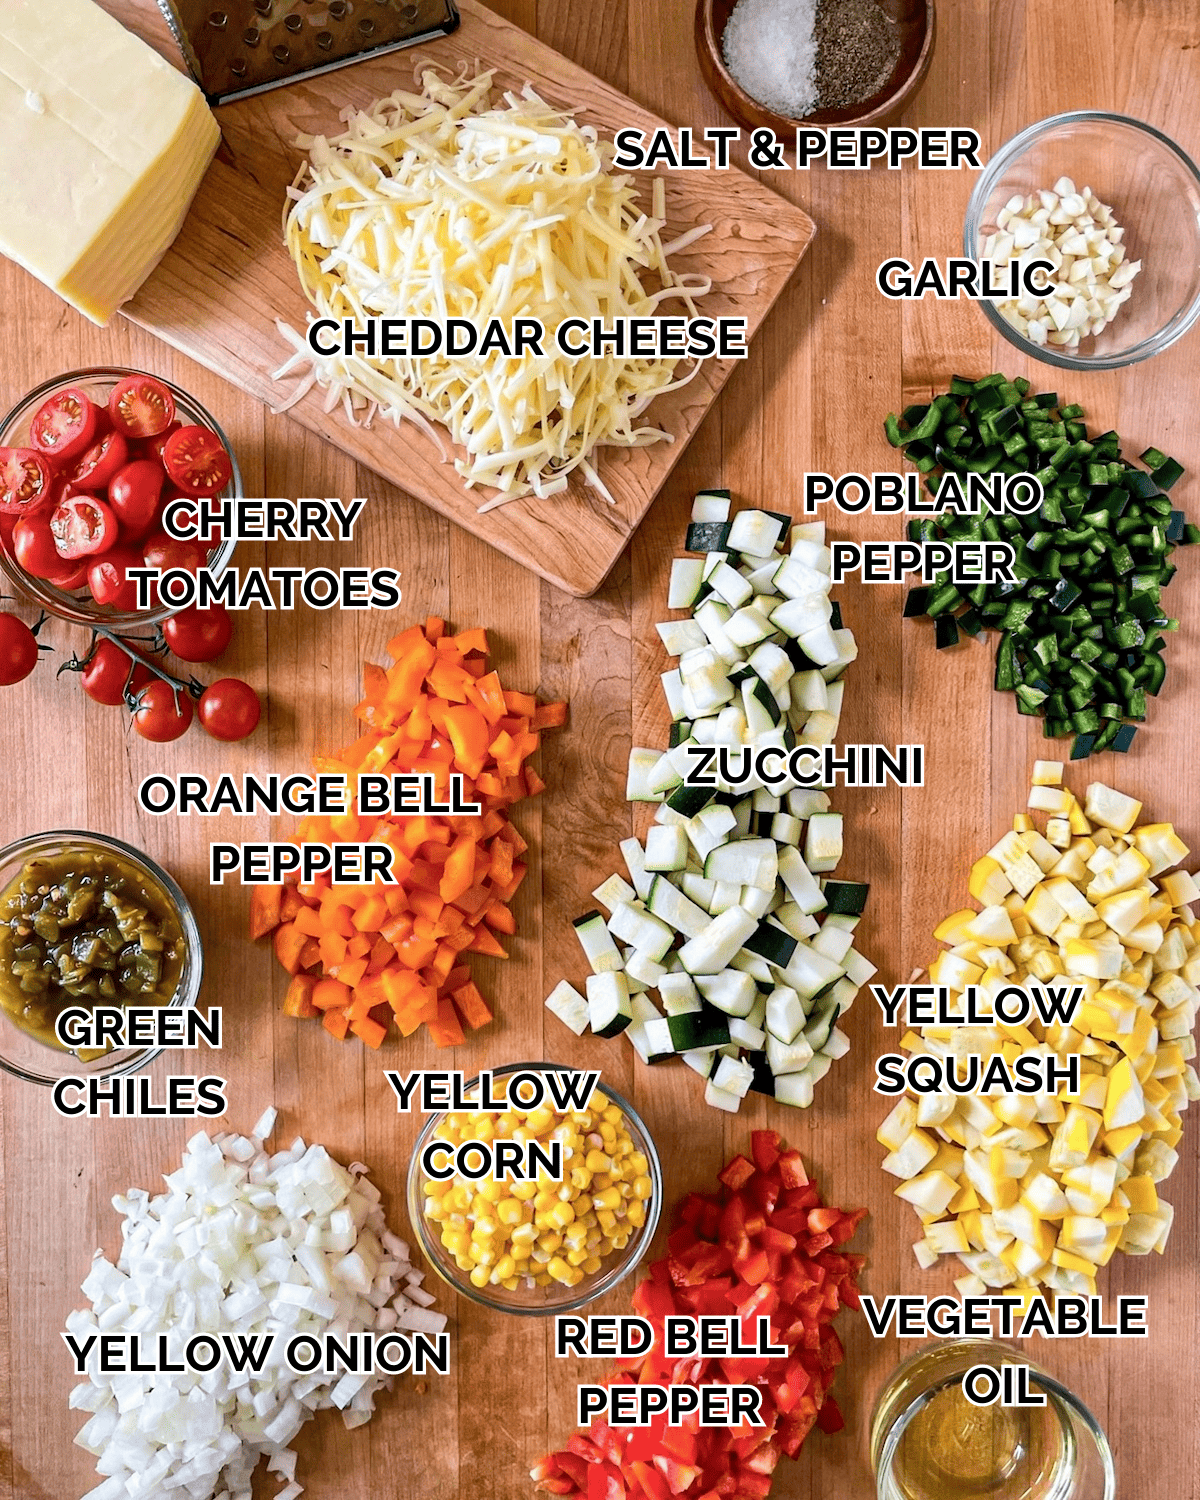 Calabacitas Ingredients prepped on a wooden cutting board.  Ingredients include cheddar cheese, salt and pepper, cherry tomatoes, garlic, poblano peppers, zucchini, orange bell peppers, green chiles, yellow corn, yellow squash, yellow onion, red bell pepper, and vegetable oil.  